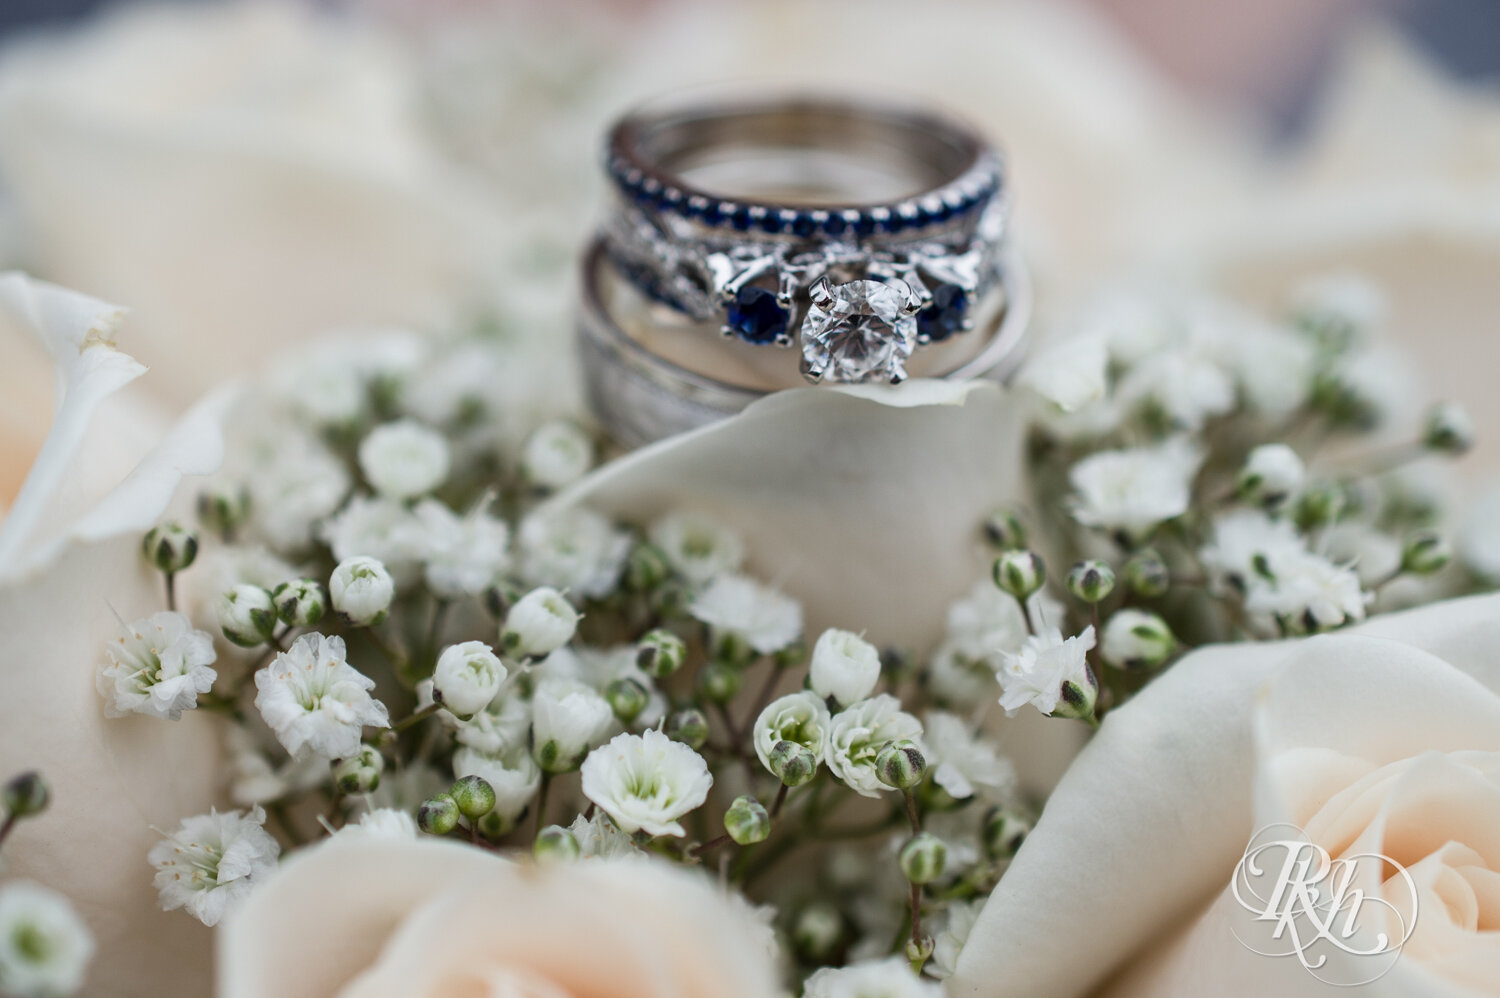 Wedding ring with sapphires in flowers at Eagan Community Center in Eagan, Minnesota.